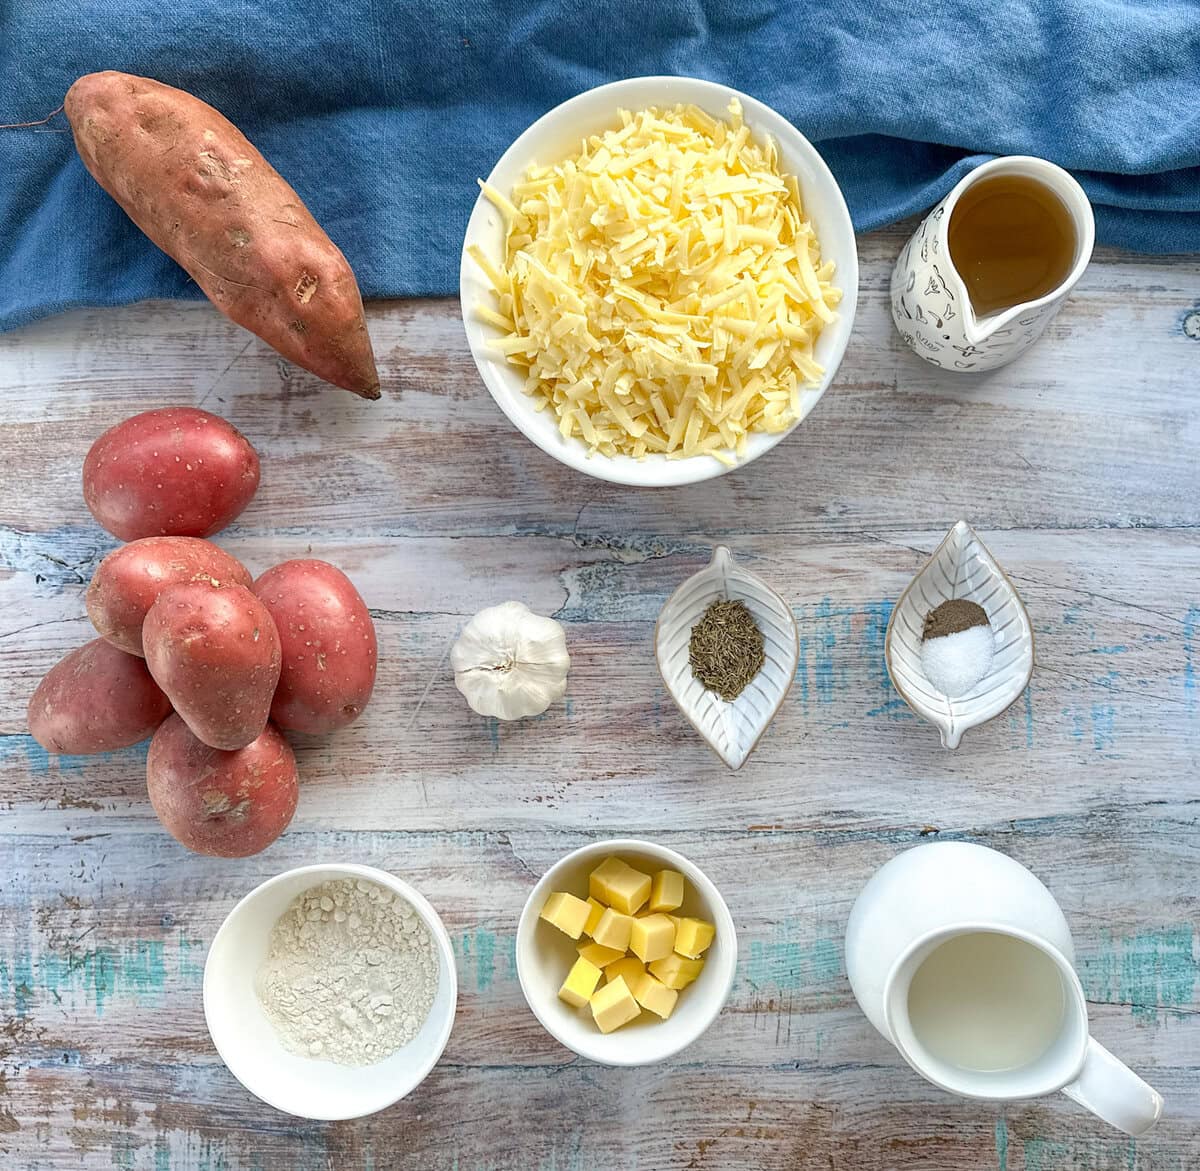 Ingredients used to make Kumara and Potato Bake, see full recipe card for details